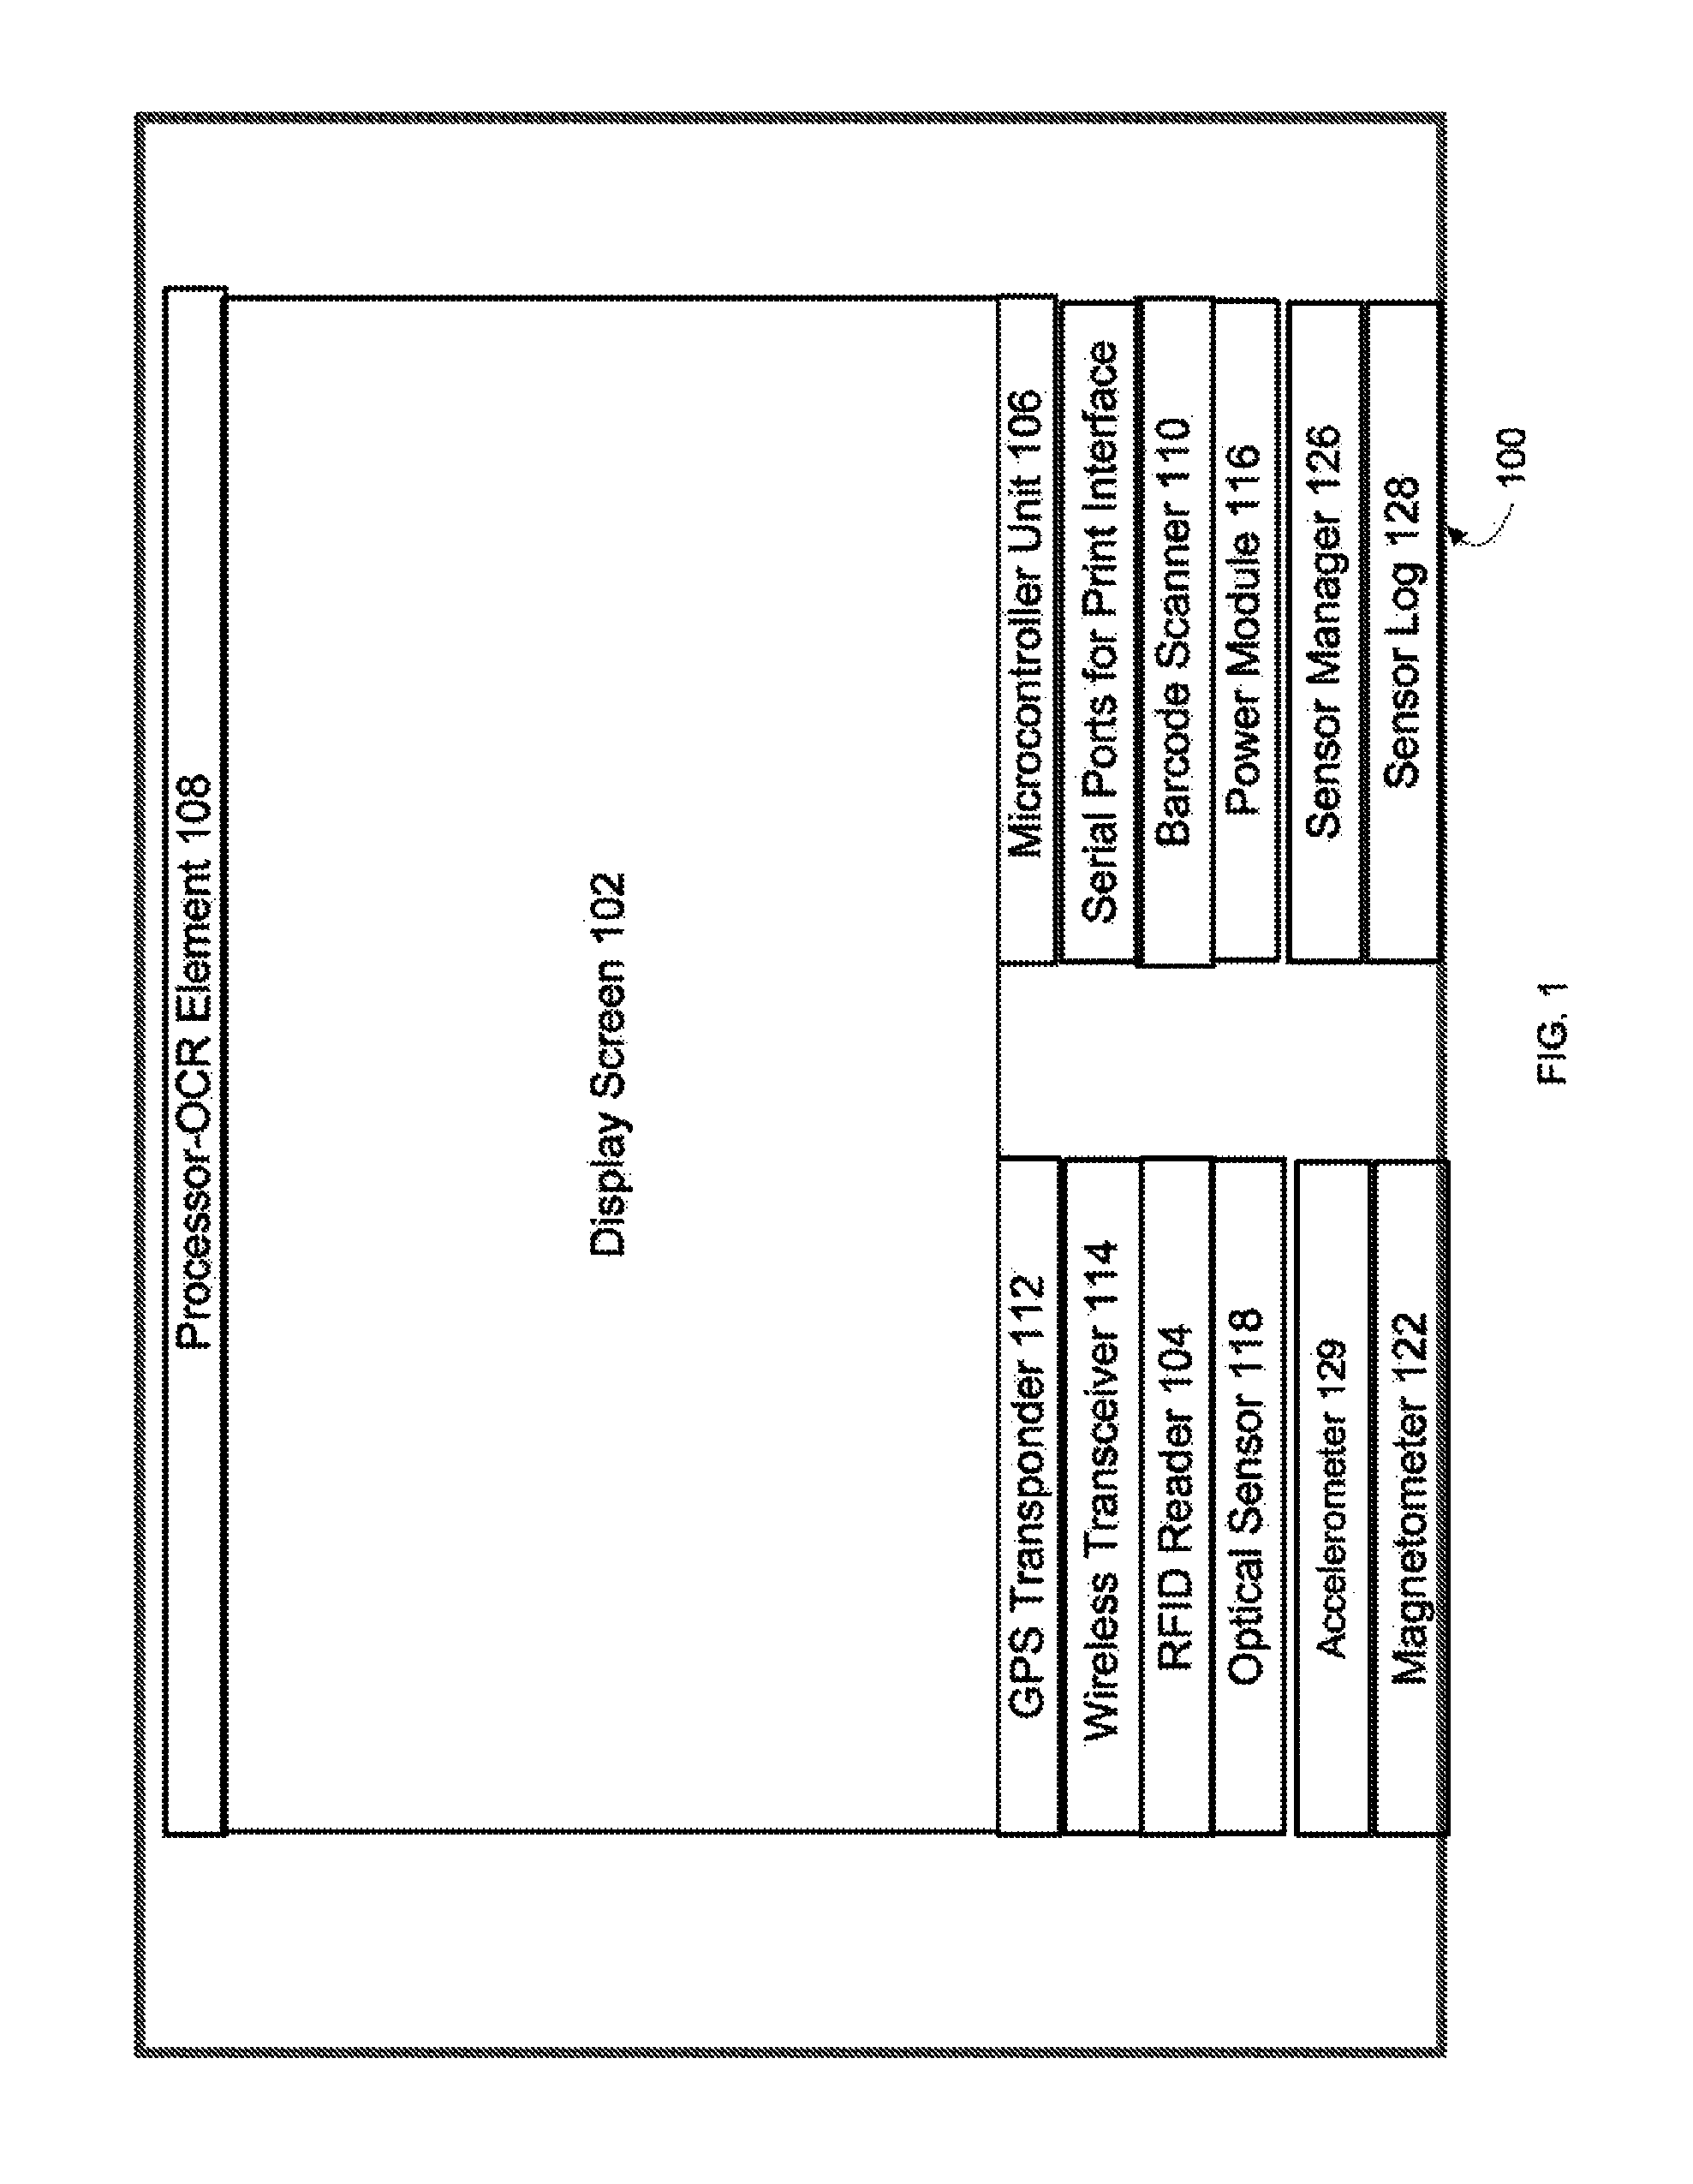 Method and apparatus for electronically organizing transport documents